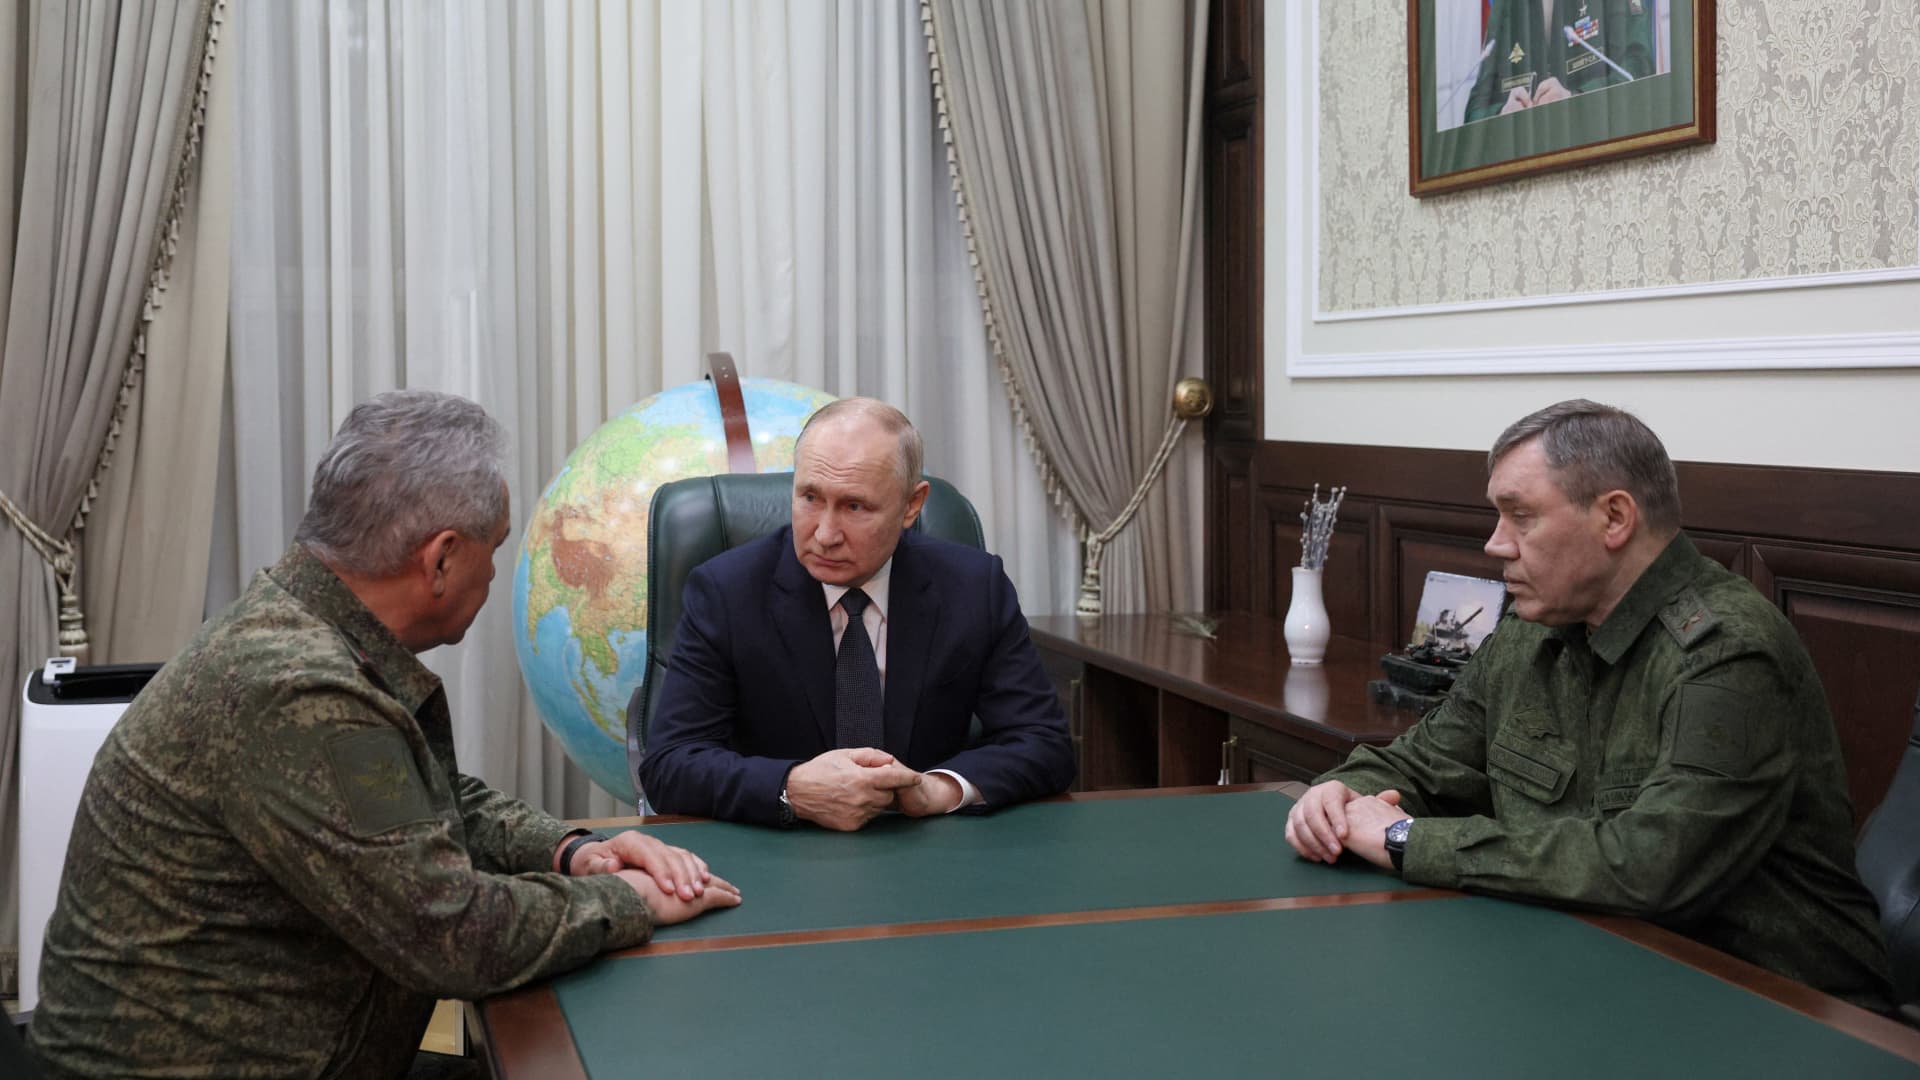 Russian President Vladimir Putin in a meeting with Russian Defense Minister Sergei Shoigu (left) and Russian Army chief of staff, Valery Gerasimov, during a visit to military headquarters in Rostov-on-Don.